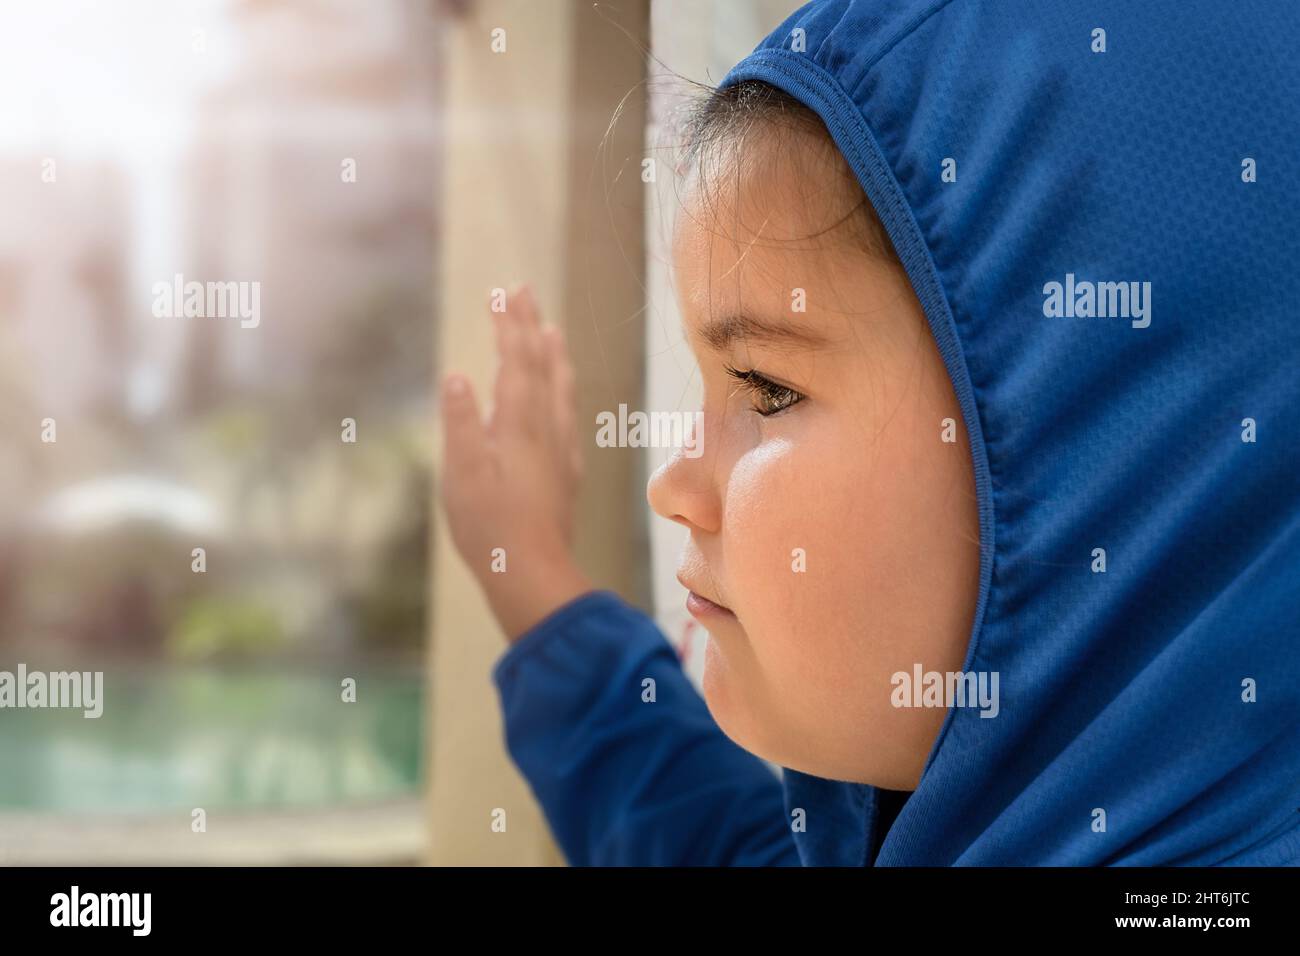 Sad child looks out the window with her hand on the glass Stock Photo